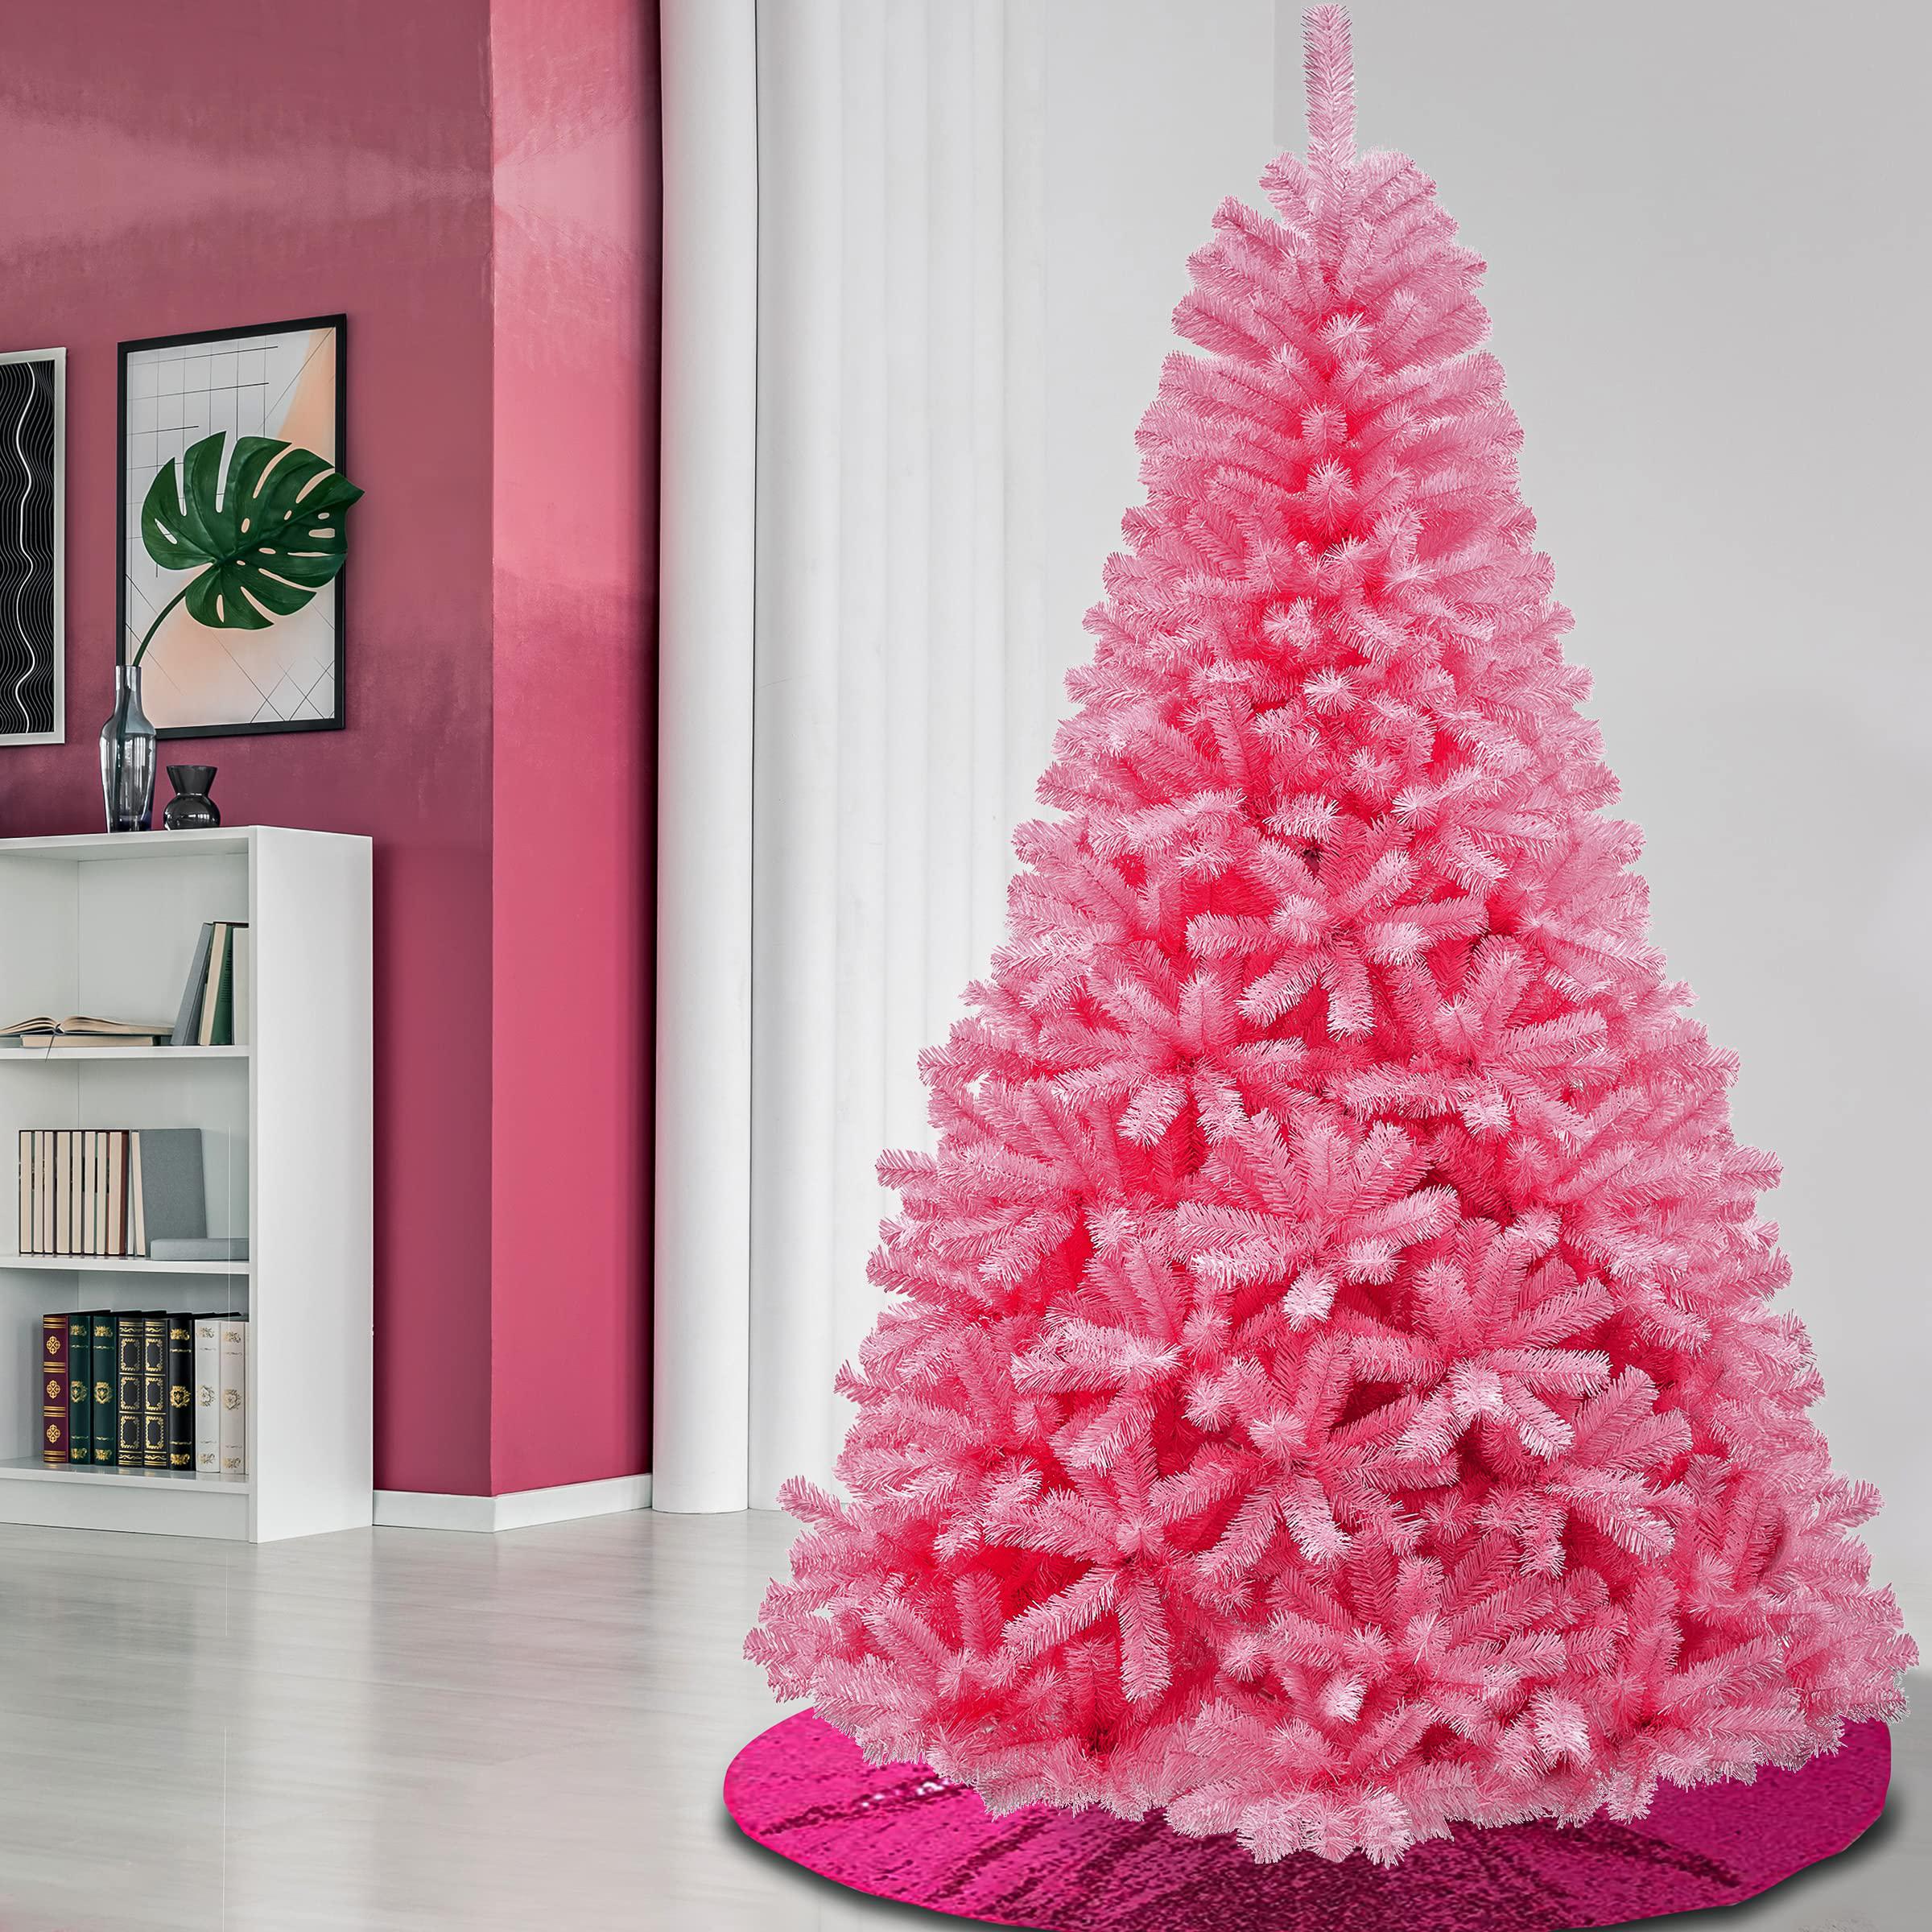 national tree company first traditions color pop christmas tree, pink, 7.5 ft